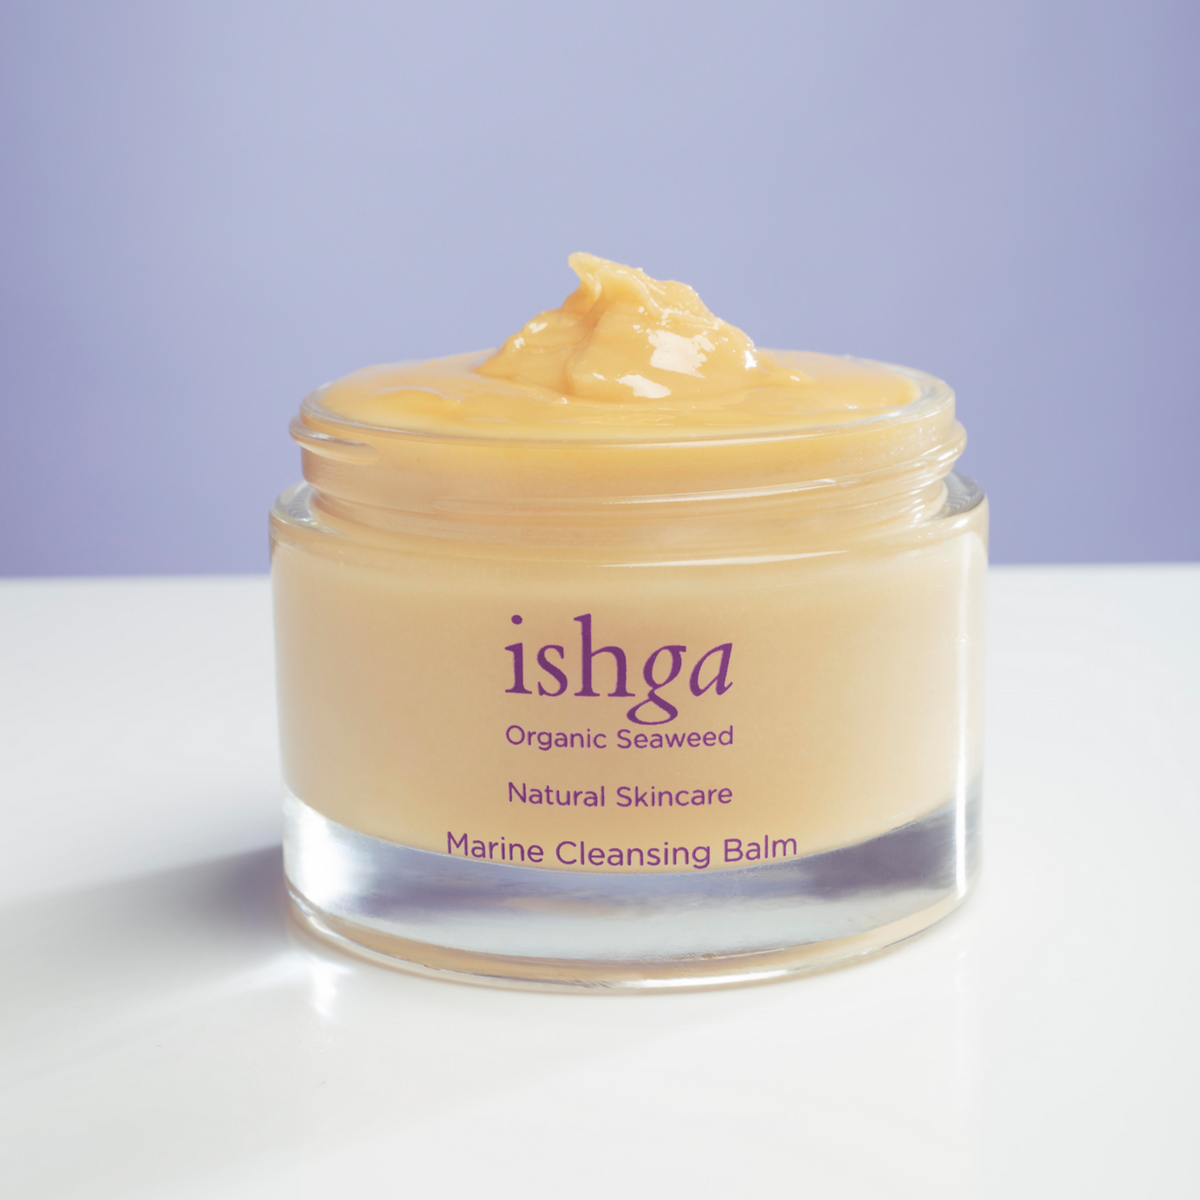 Jar of ishga Marine Cleansing Balm with no lid